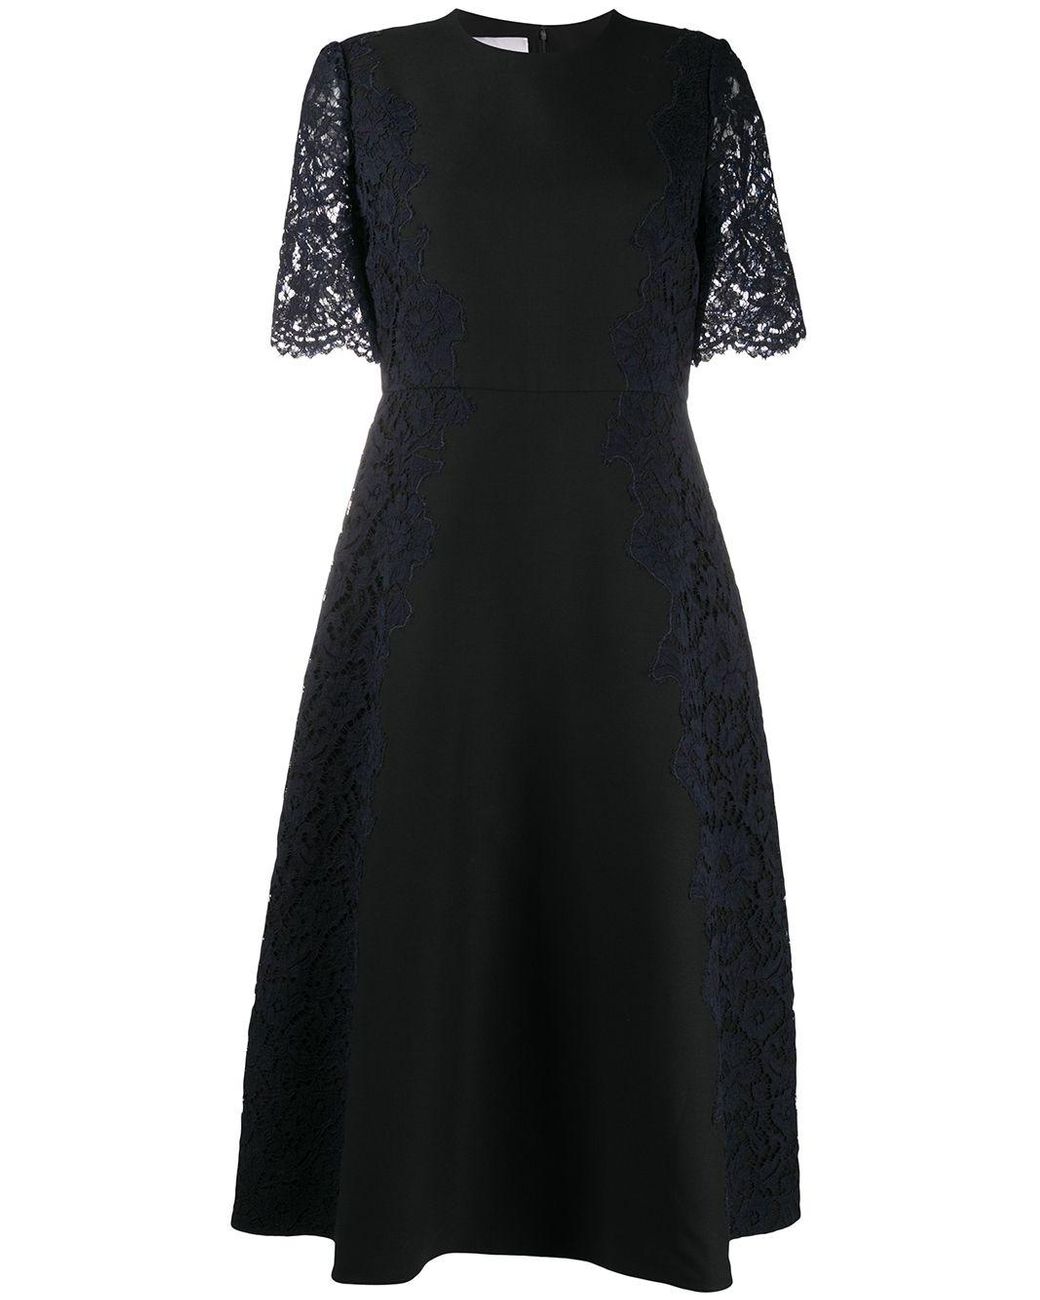 Valentino Lace Sleeve Dress in Black - Lyst